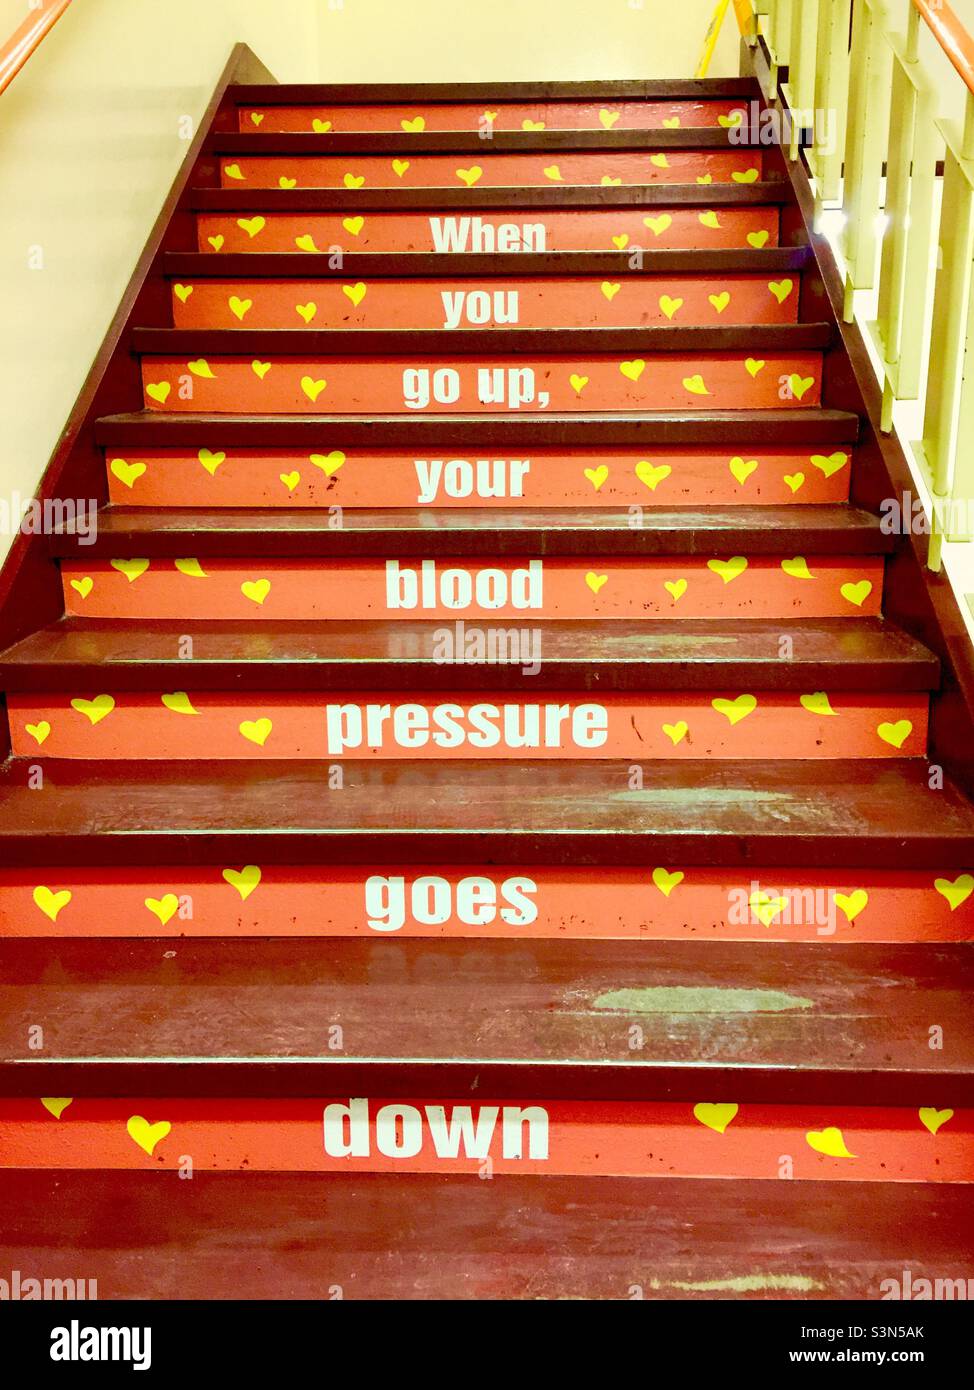 Messages on the steps. Take the stairs. Good for keeping blood pressure down, Ontario, Canada. Motivational. Health benefits. Walking. Stock Photo